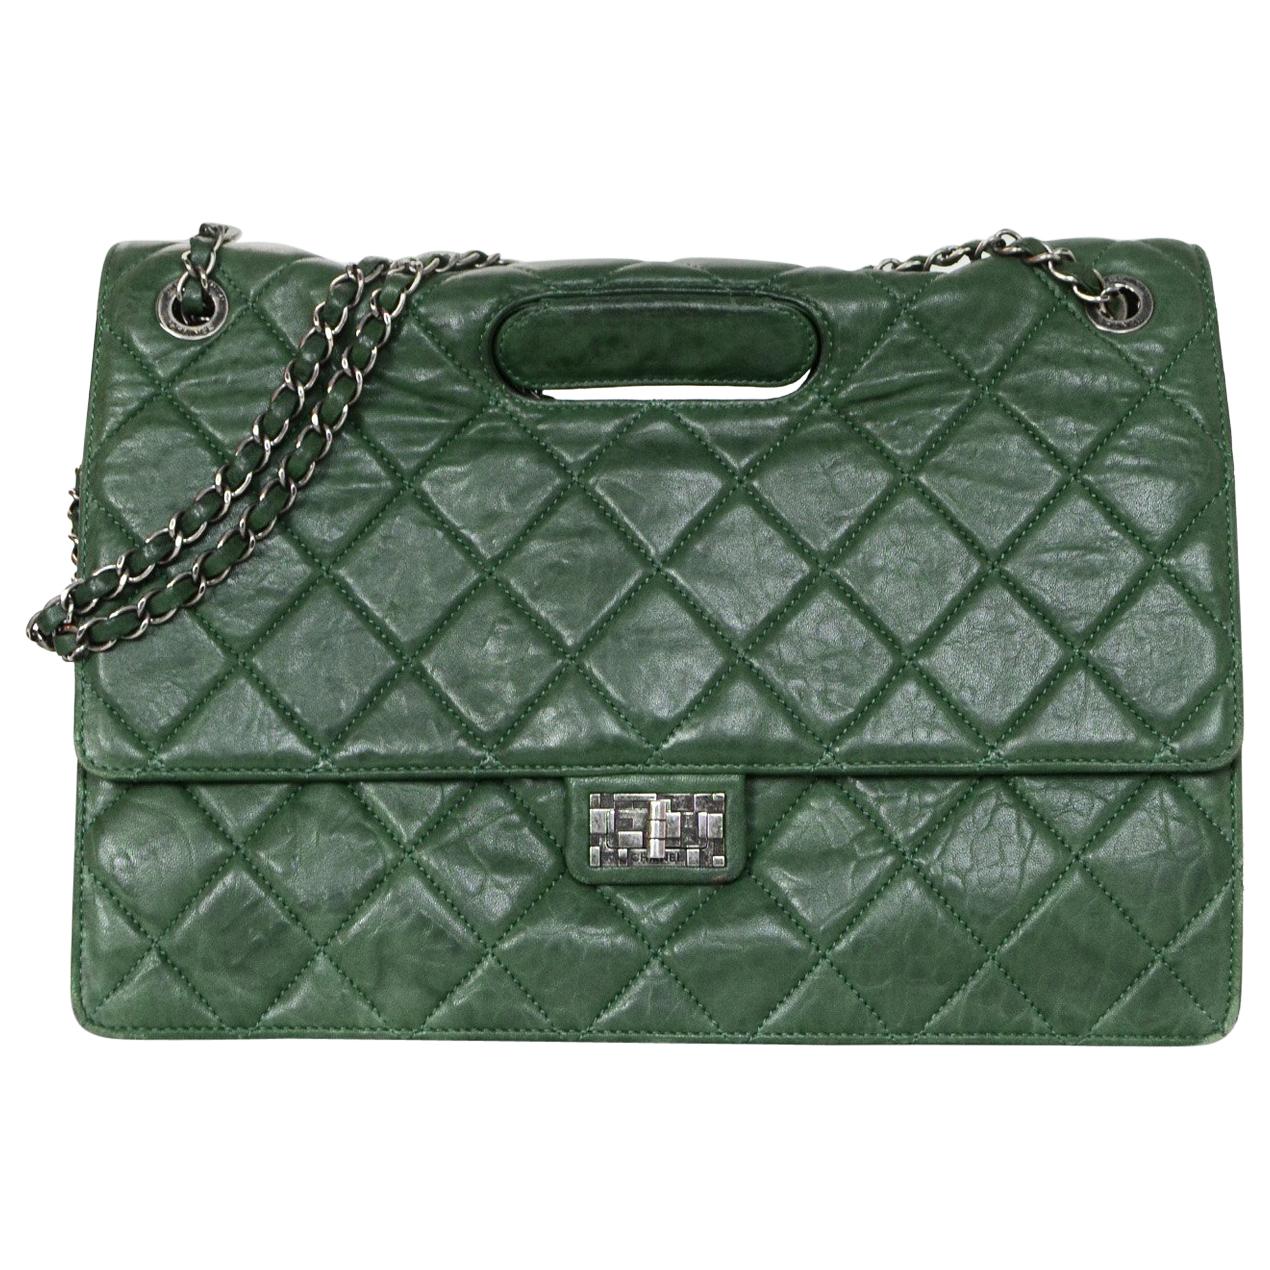 Chanel Green Calf Leather Quilted Paris-Byzance Take Away 2.55 Reissue Flap Bag 